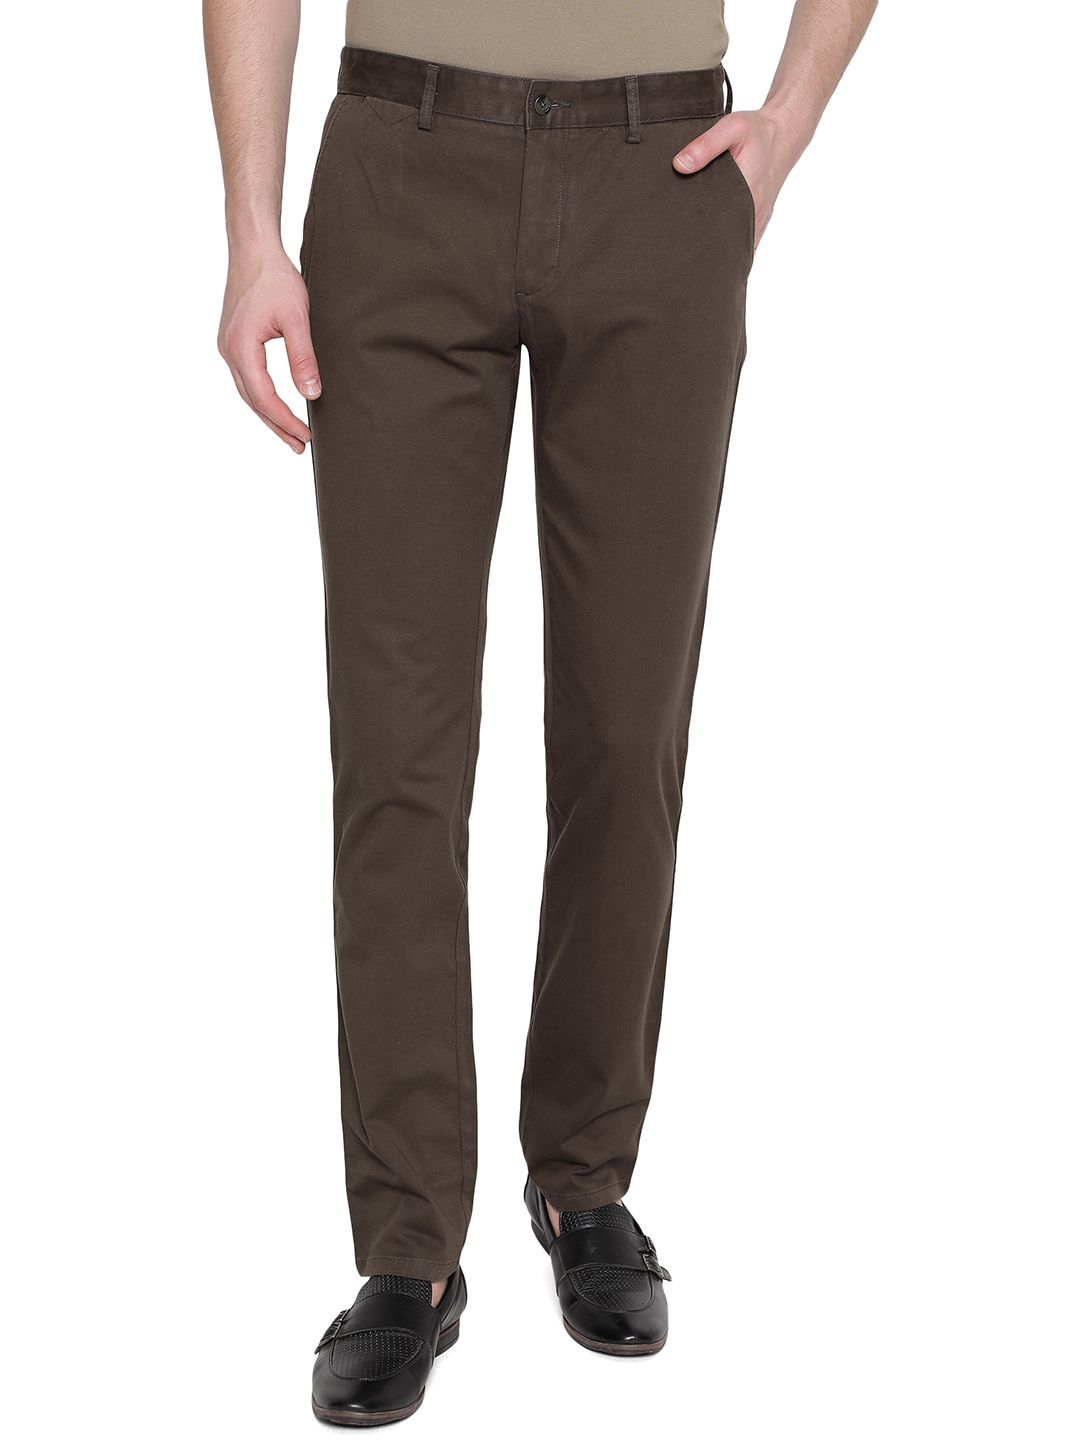 Greenfibre | Brown Solid Super Slim Fit Casual Trouser | Greenfibre